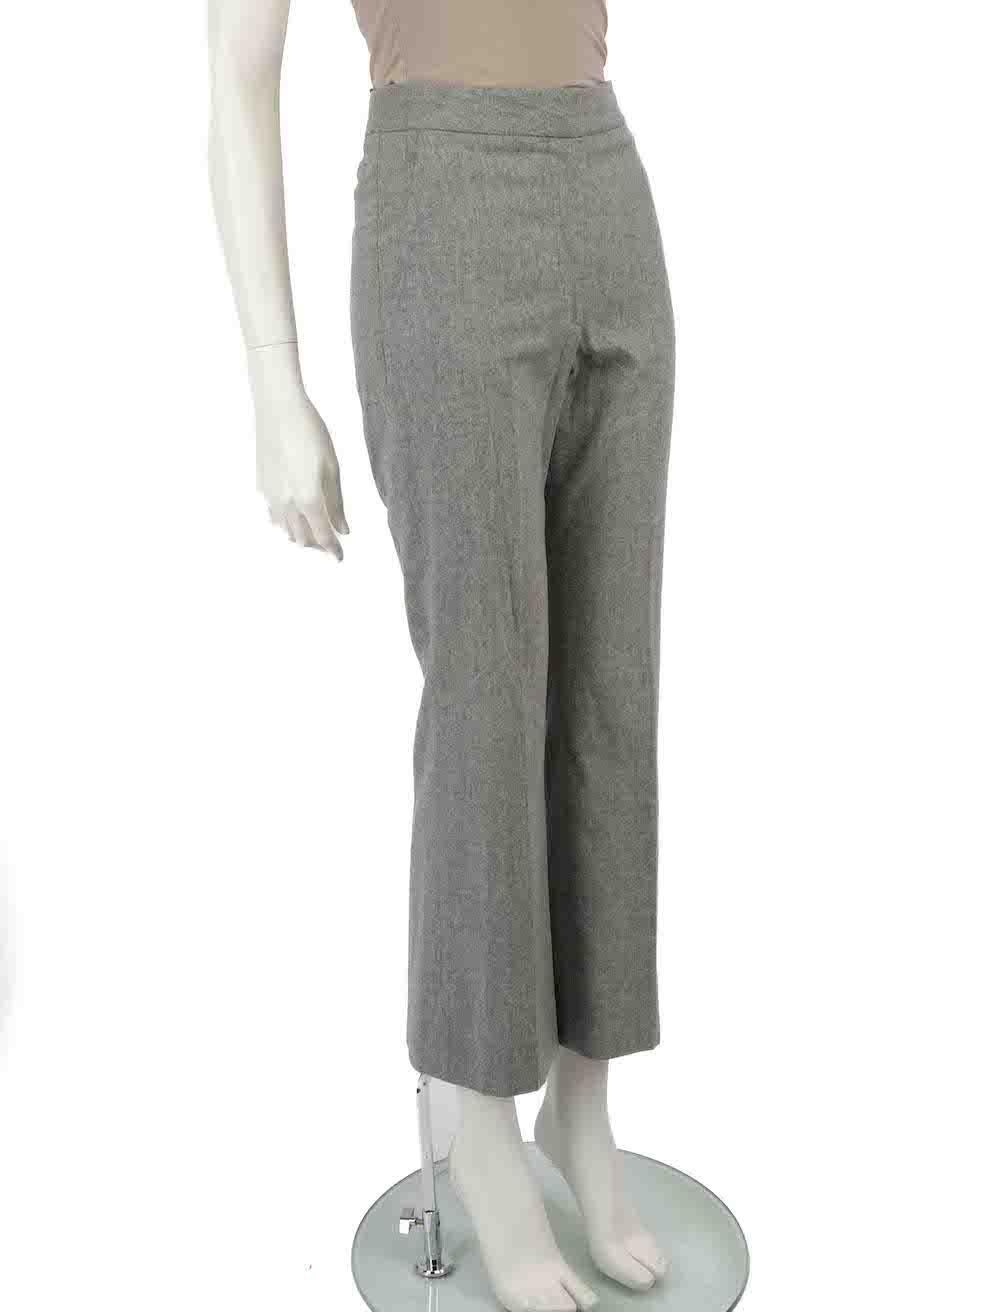 CONDITION is Very good. Minimal wear to trousers is evident. Minimal wear to the waistband, with some slight discolouration around the inside waistband lining on this used Stella McCartney designer resale item.
 
 Details
 Grey
 Wool
 Trousers
